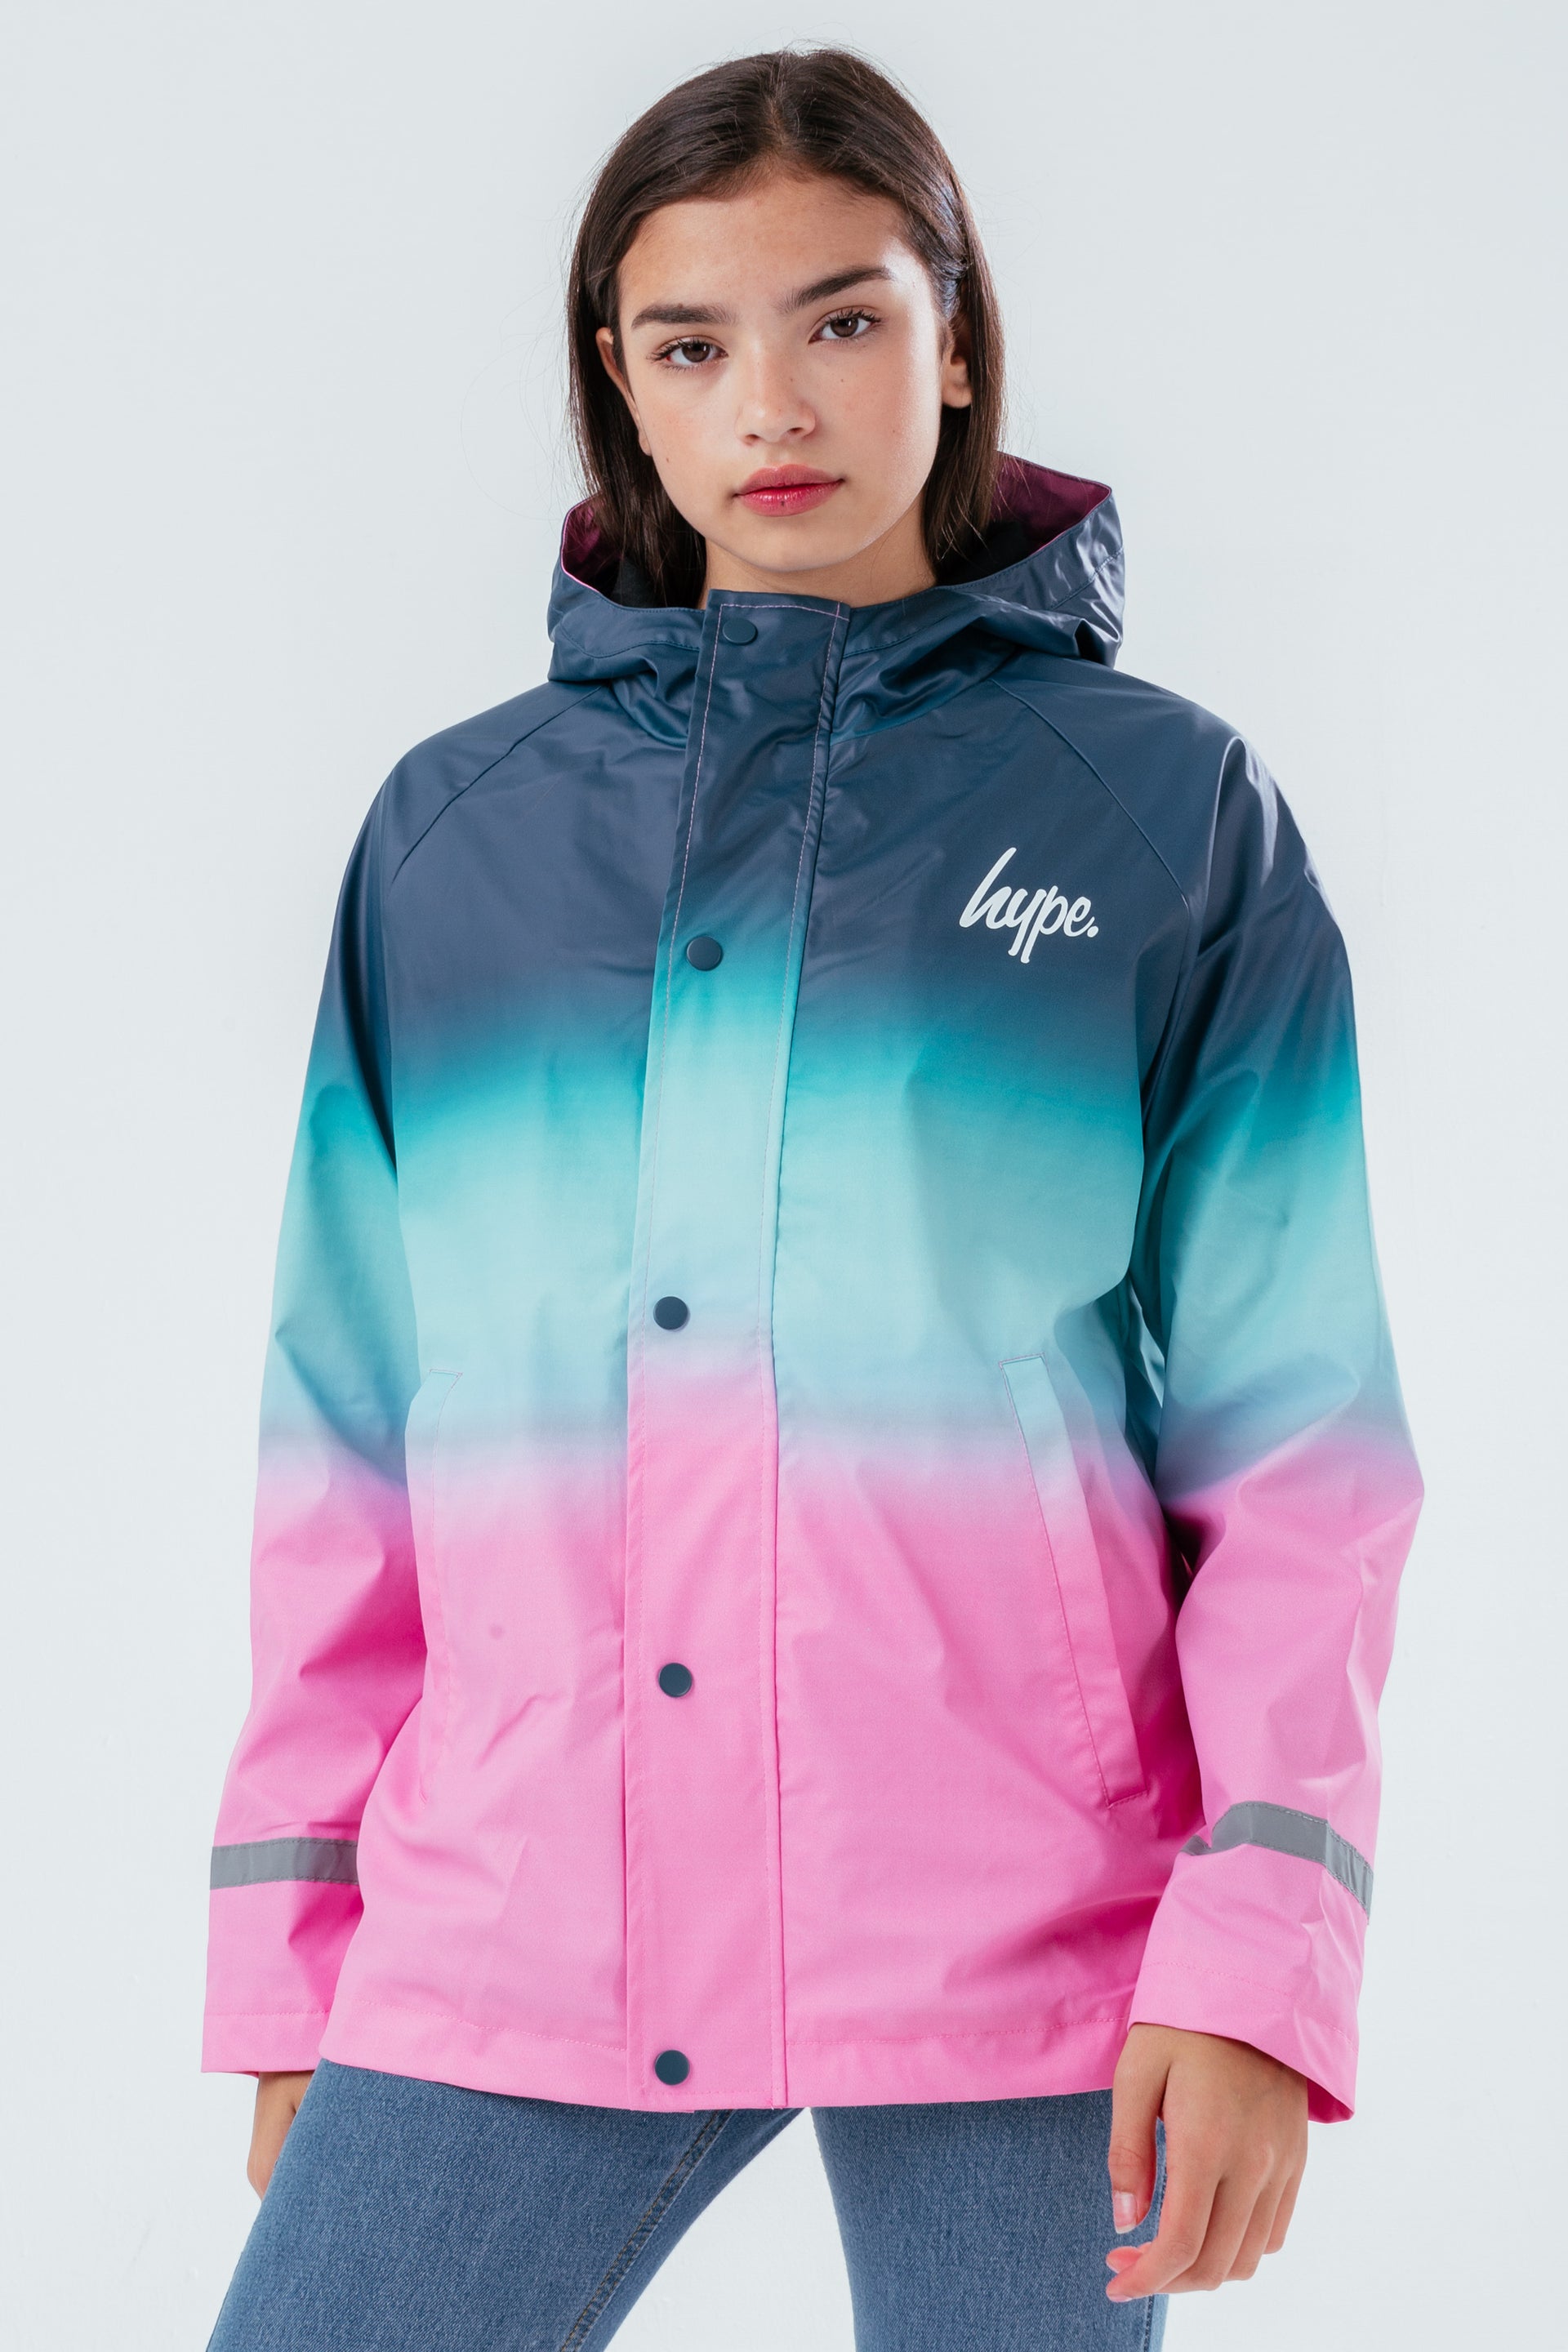 HYPE TEAL TO PINK FADE GIRLS RAIN COAT | Hype.